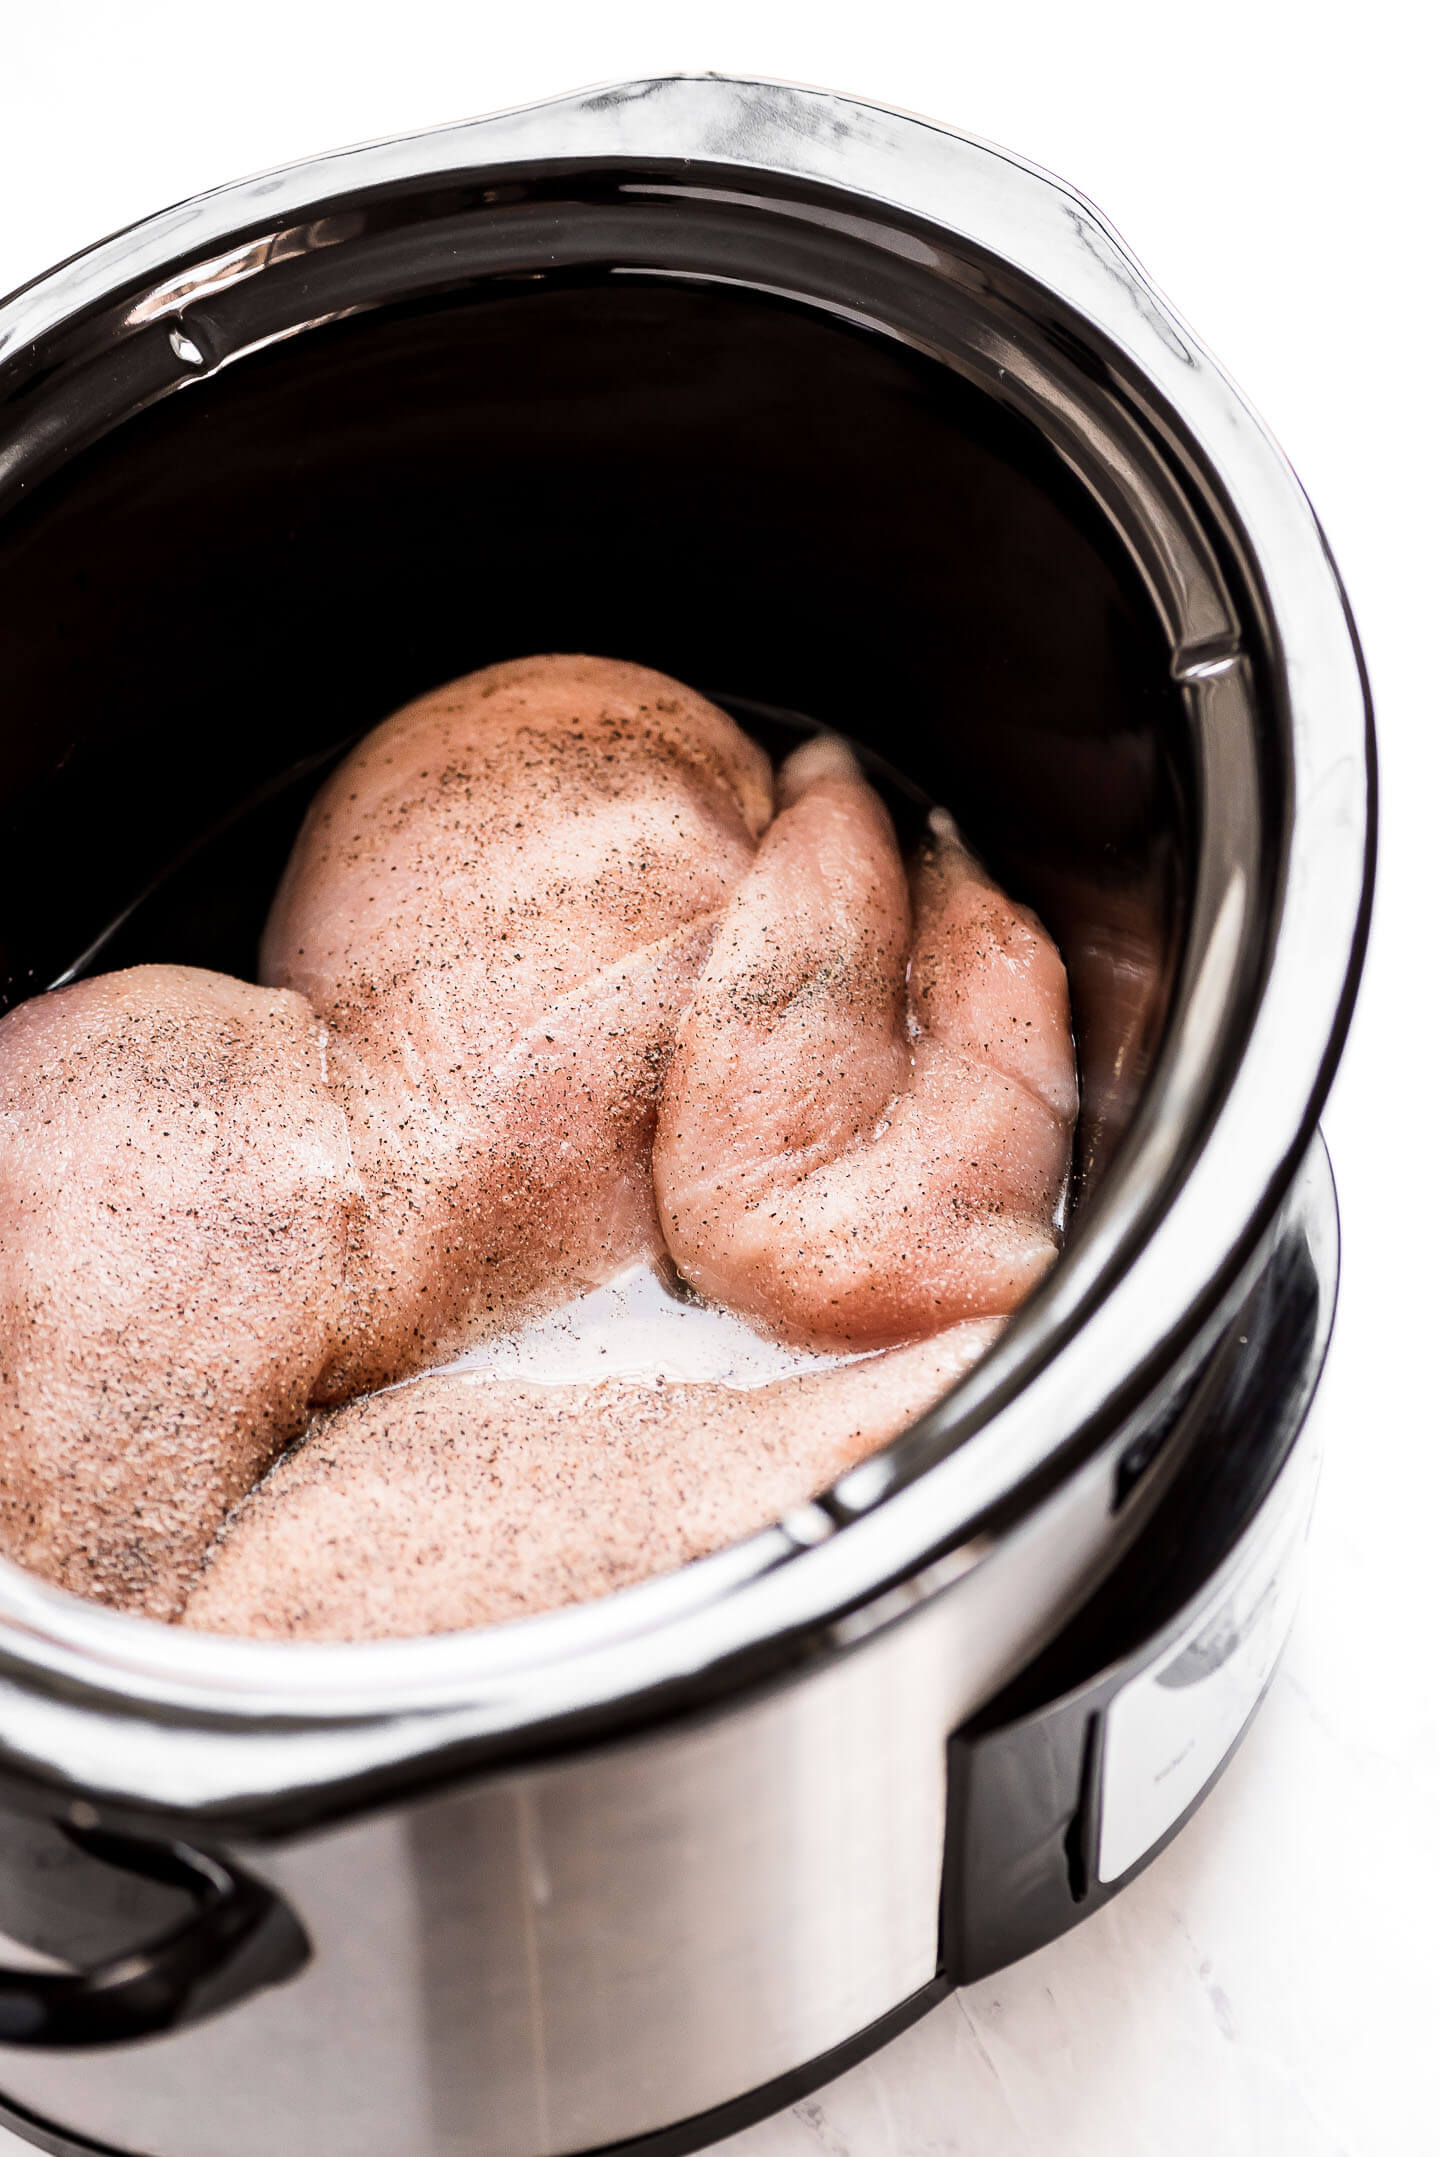 Raw boneless skinless chicken breasts in the bottom of a slow cooker seasoned with spices.